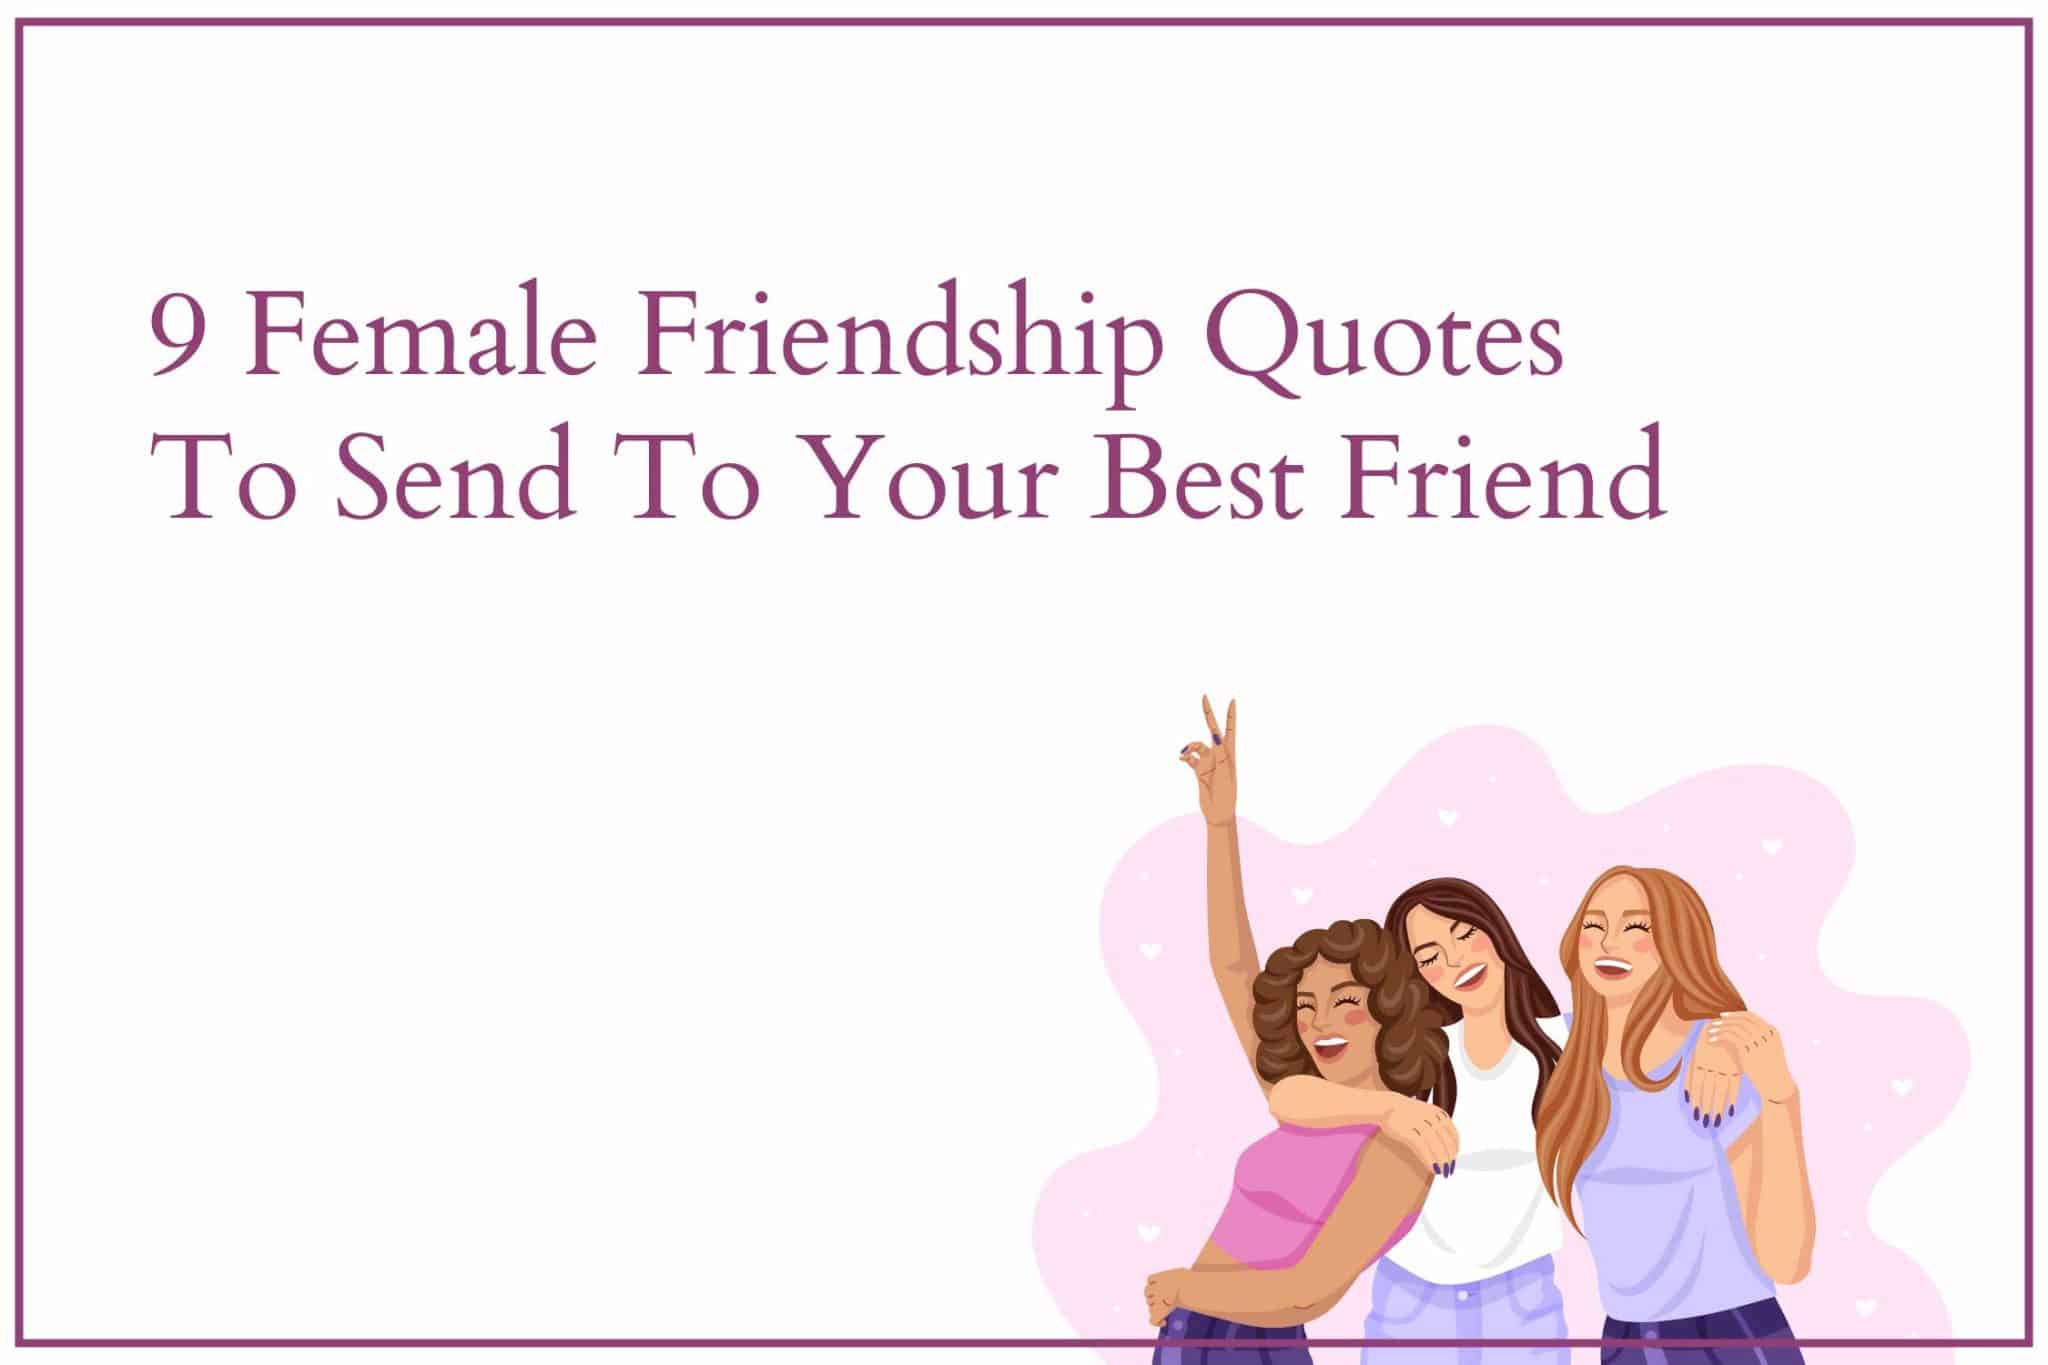 9 Female Friendship Quotes To Send To Your Best Friend